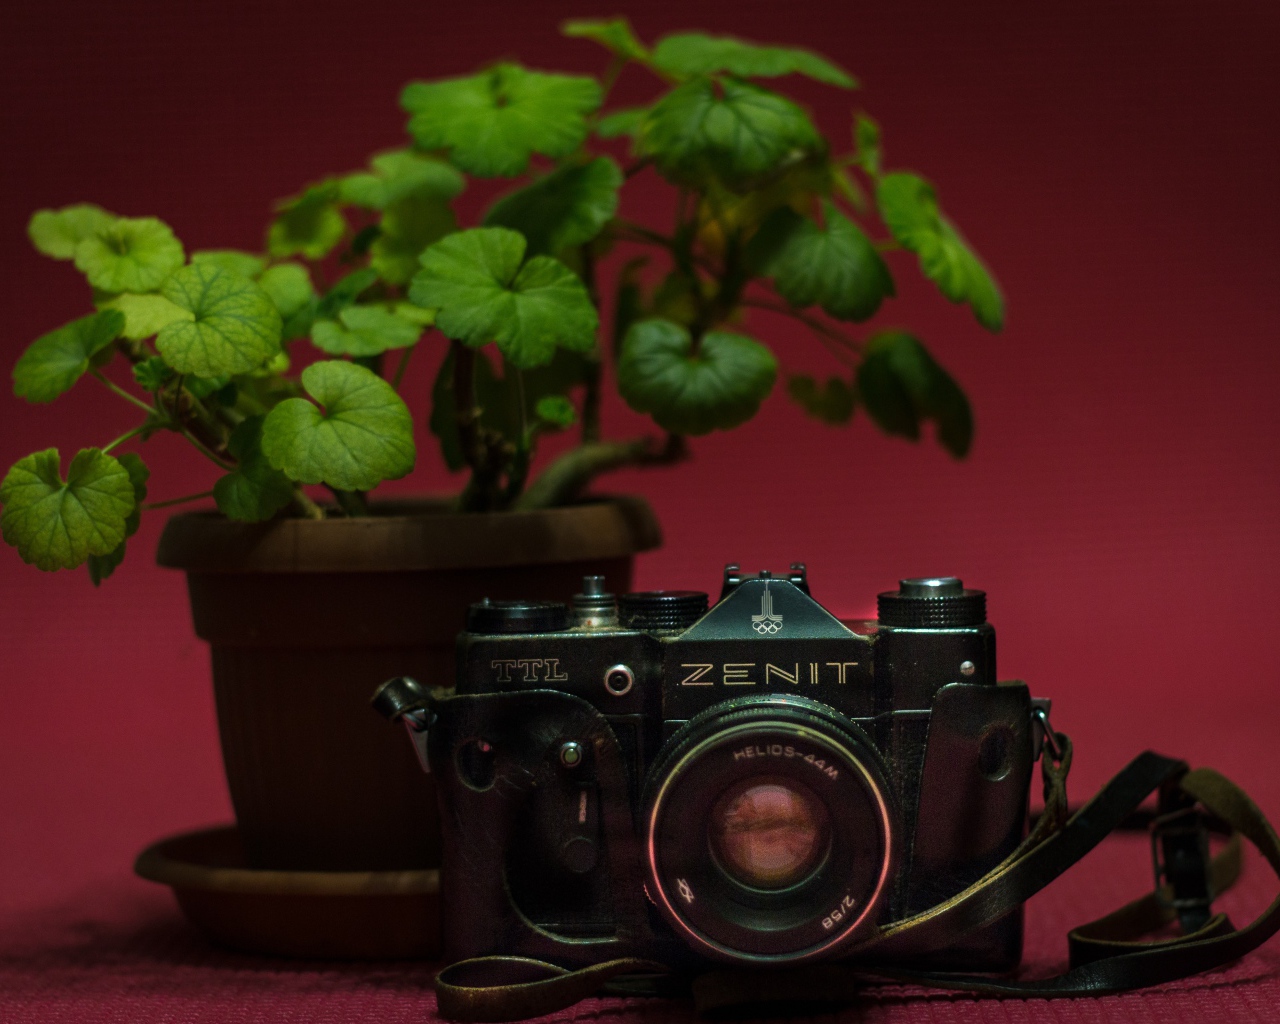 Old zenit camera on the table with geranium flower